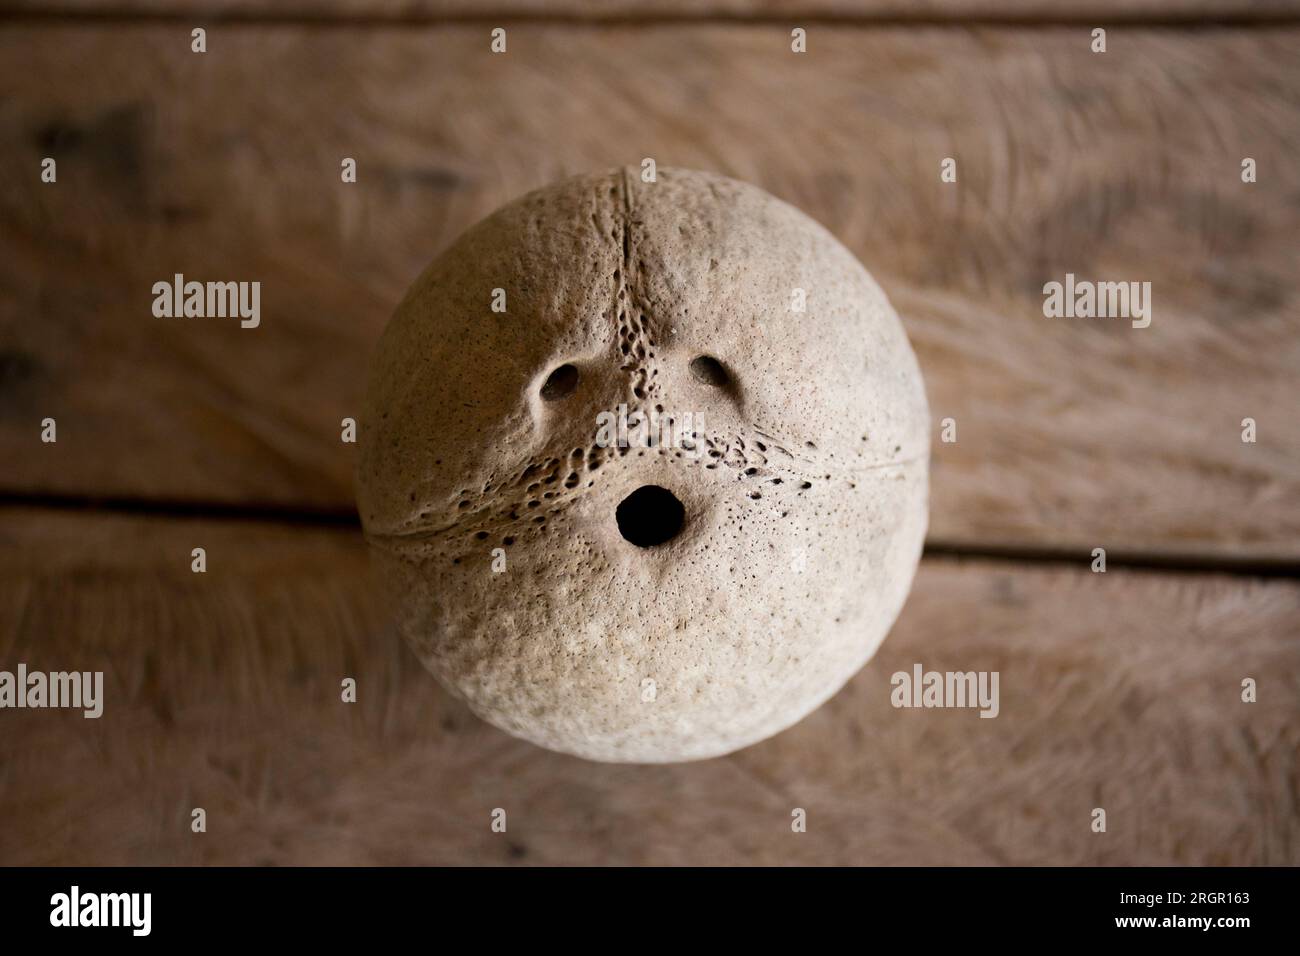 Coconut shell with three holes on a wooden background. Stock Photo